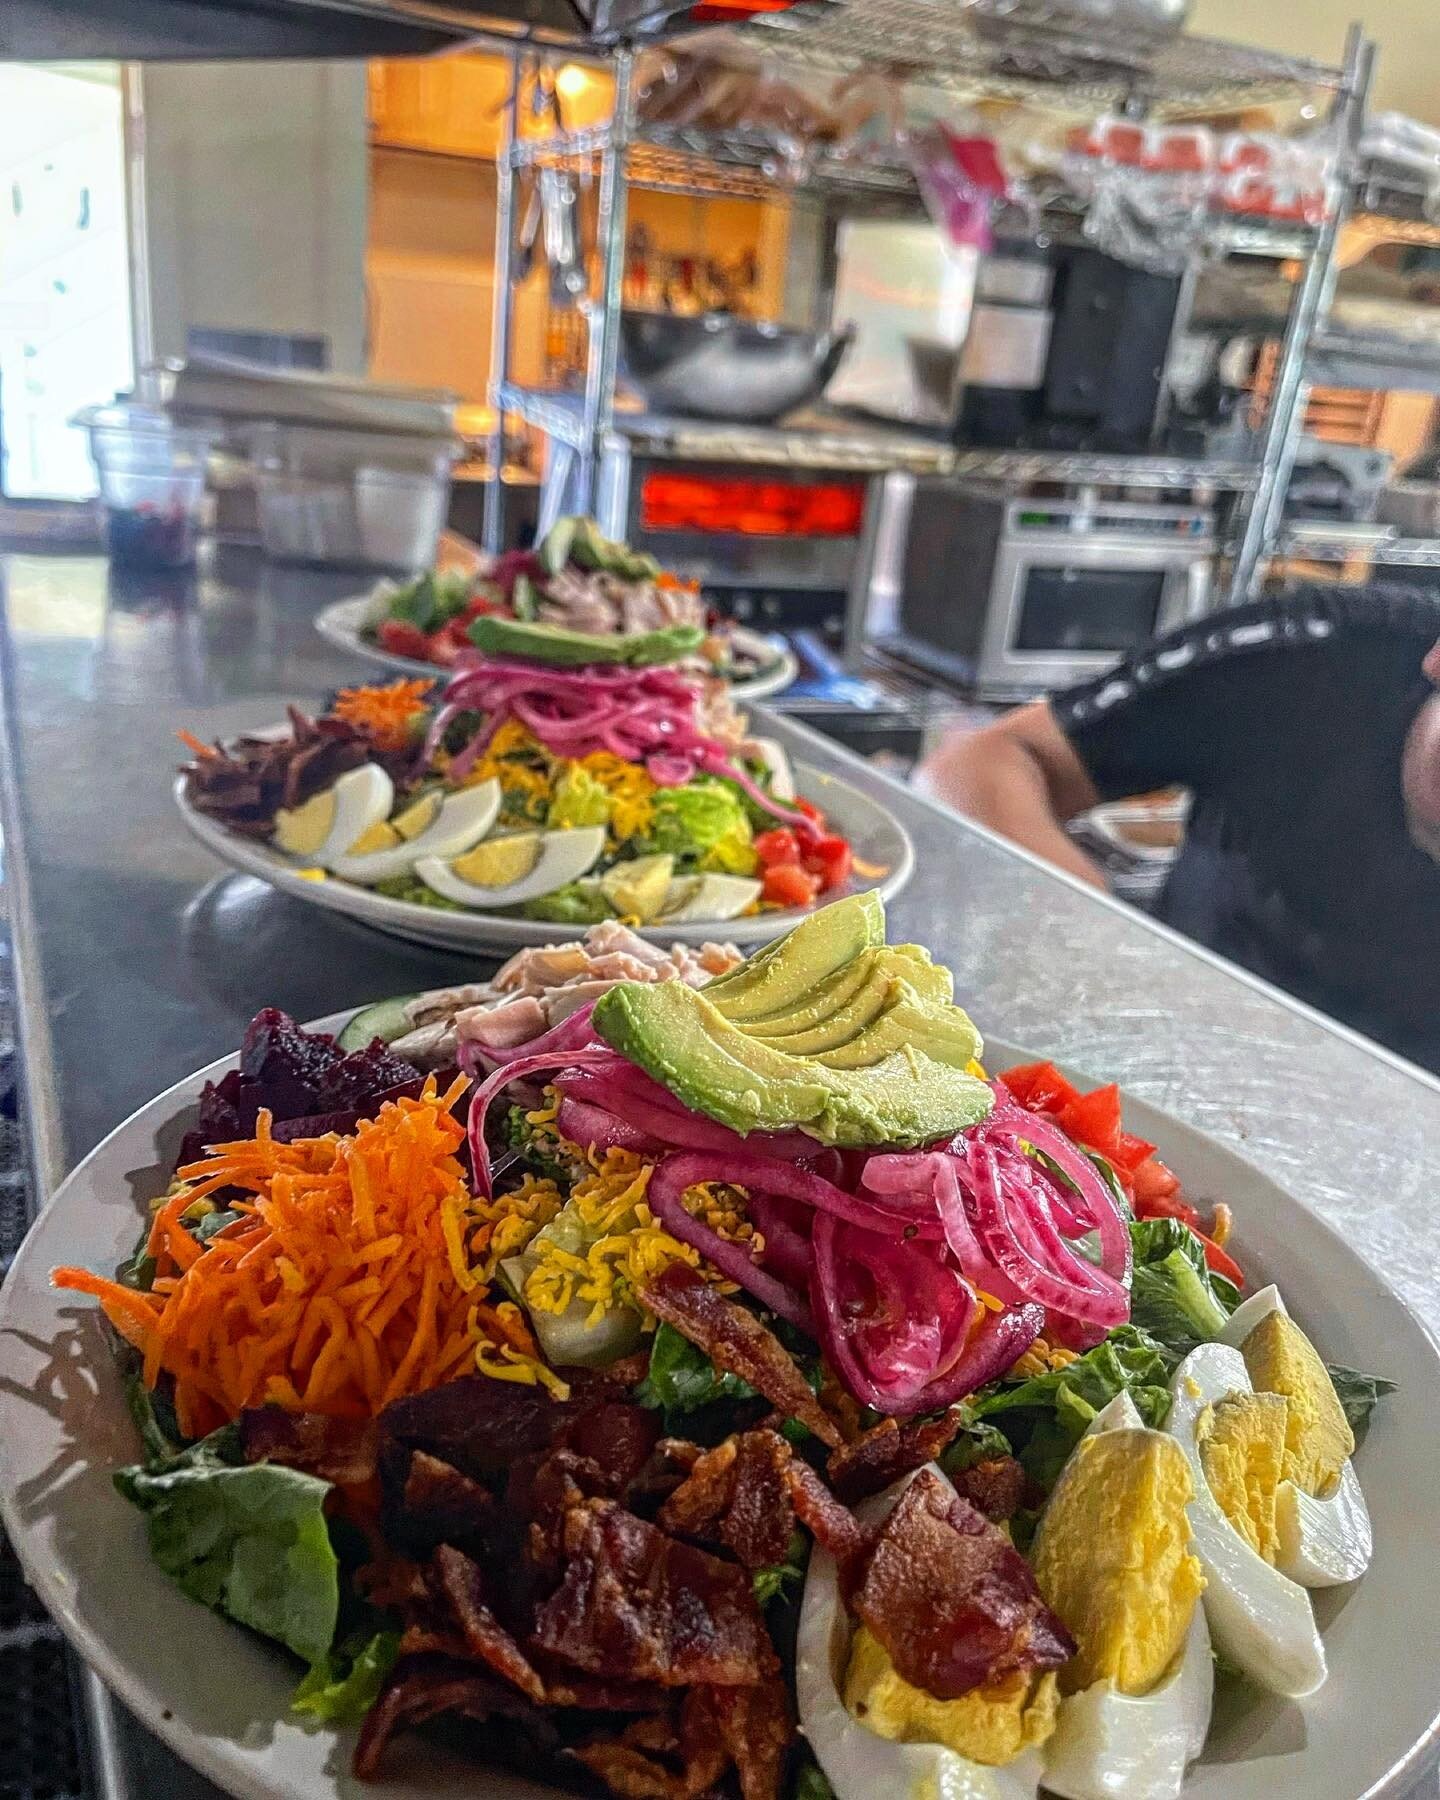 The sun is out and the veggies are coming in&hellip; that means it&rsquo;s salad season!!! Pictured here is our chef salad with all the good stuff 
#eattherainbow #salad #saladlover #fresh #goodlife #goodlifemendo #eatlocal